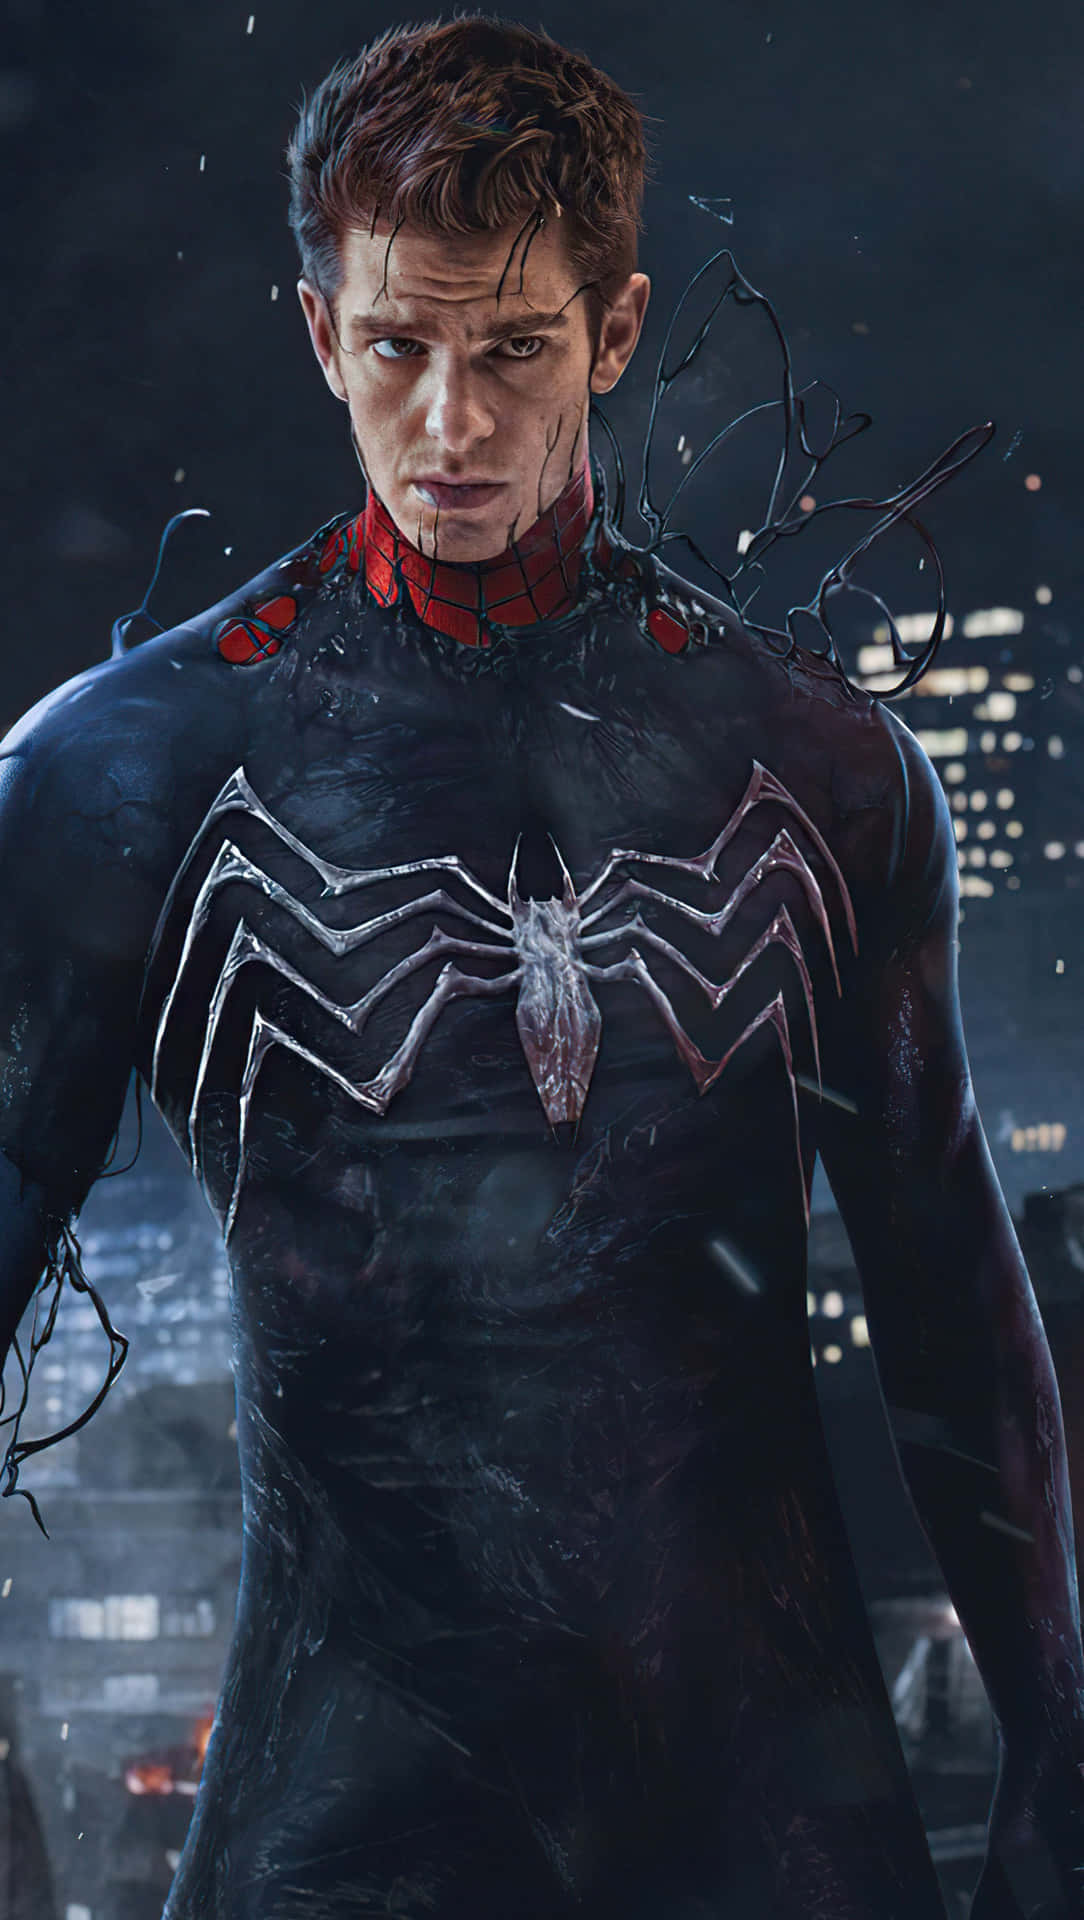 Andrew Garfield as Peter Parker, the Amazing Spider-Man Wallpaper